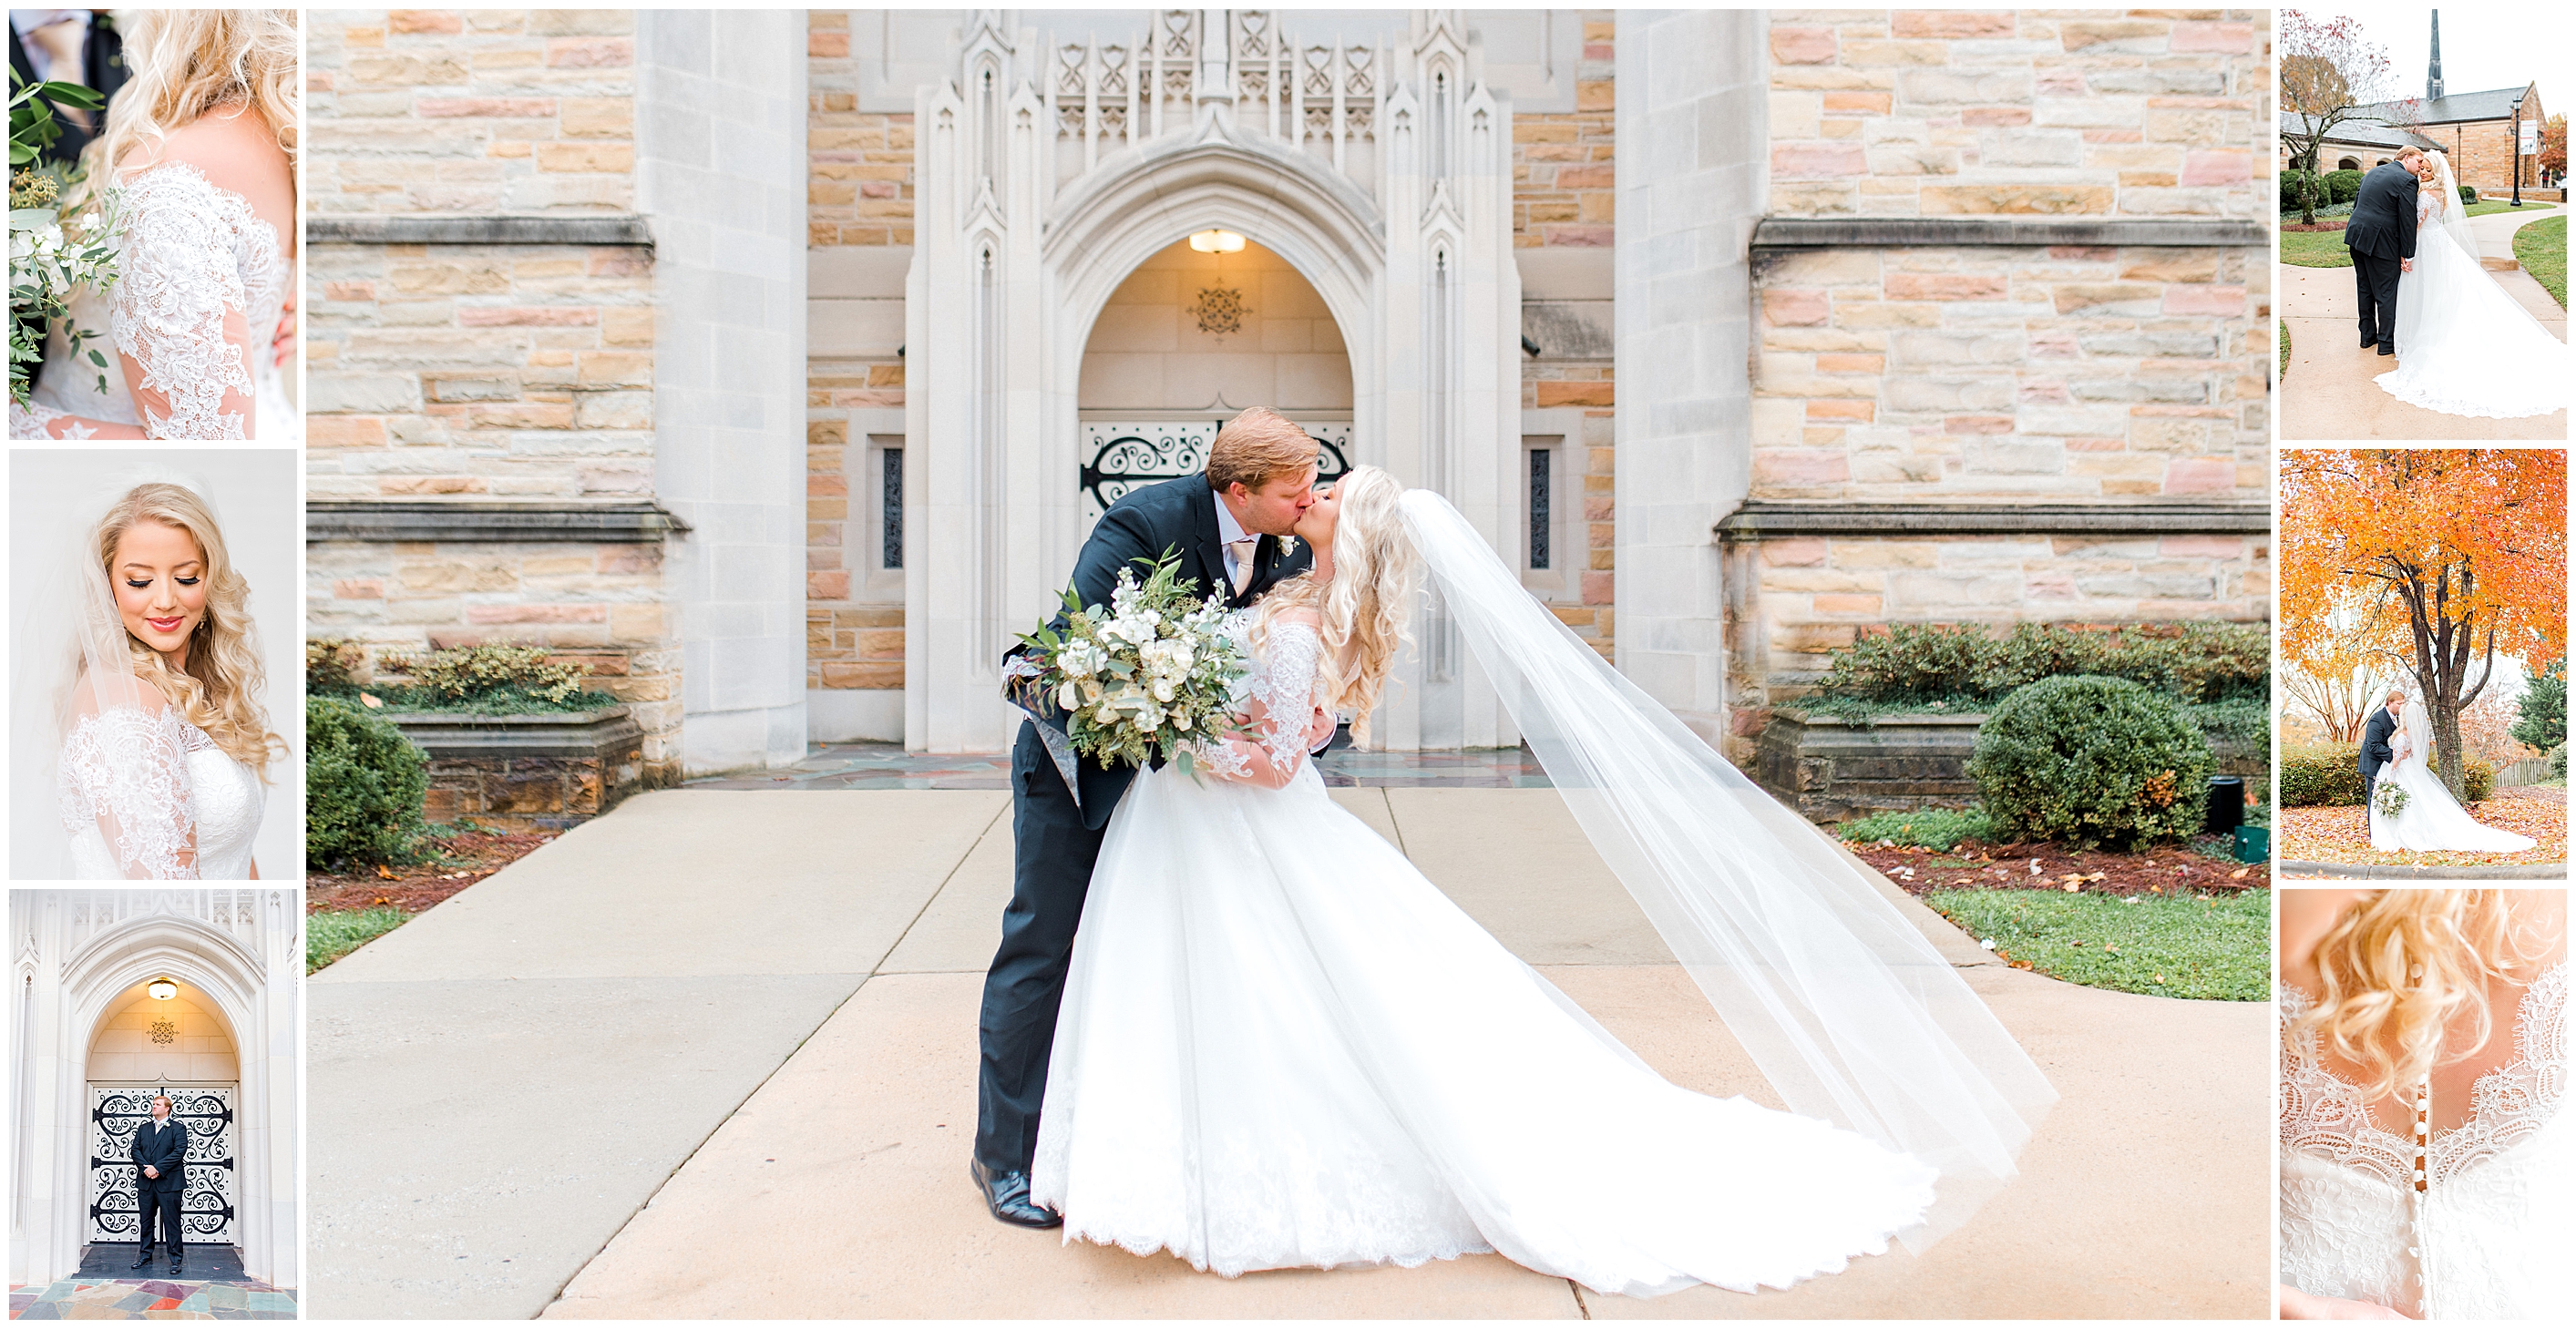 Ben and Meredith's rainy fall wedding in High Point NC